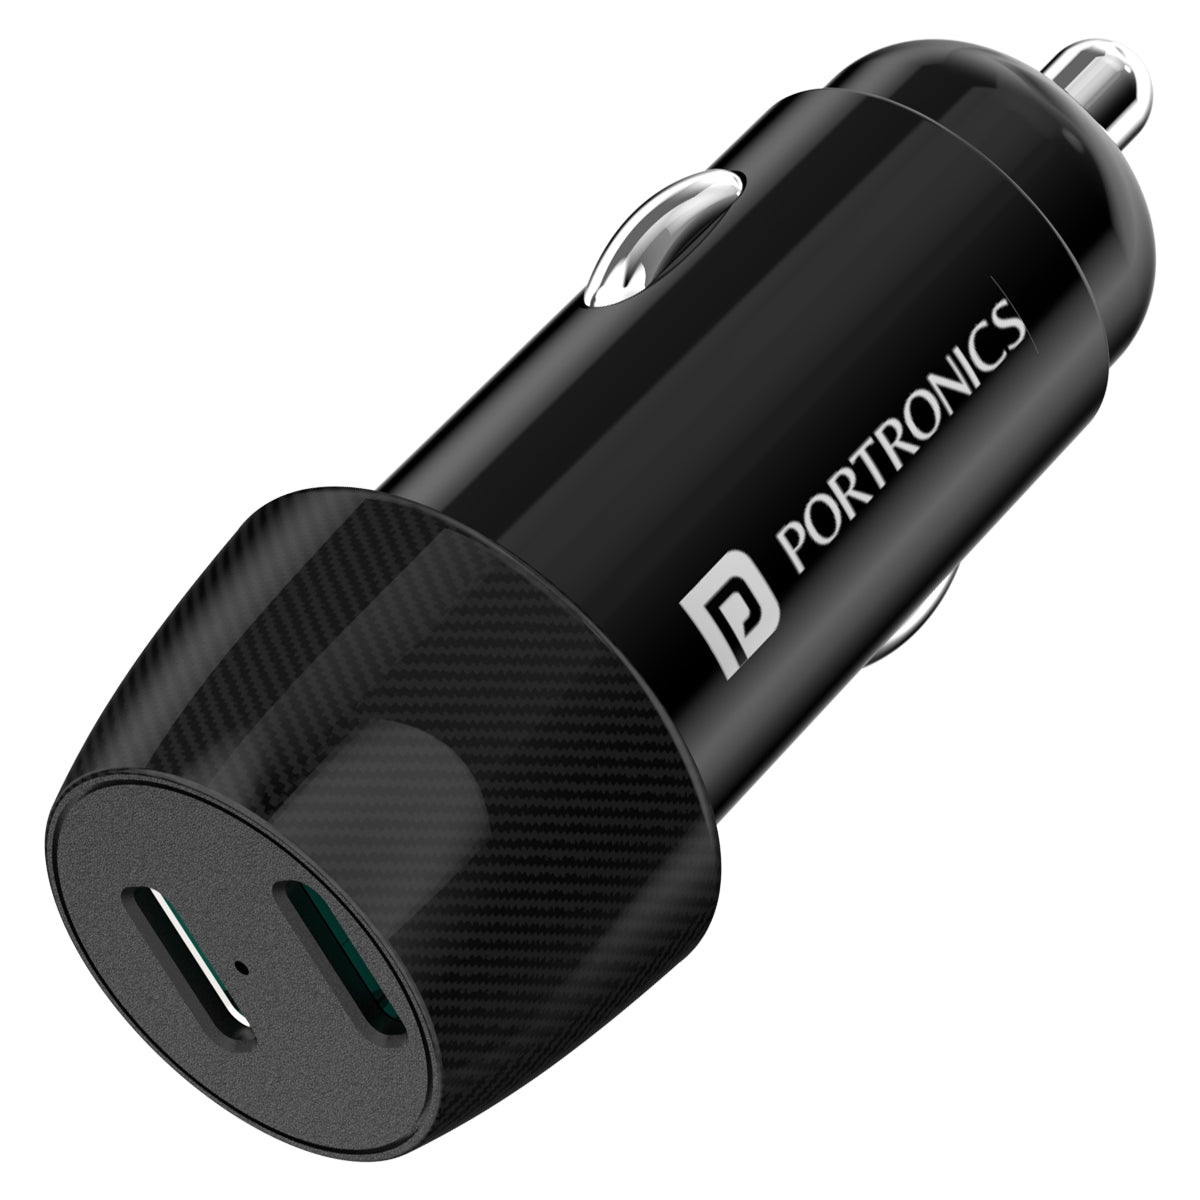 Buy Car Power 14 portable car charger with QC & PD charging ports 40W